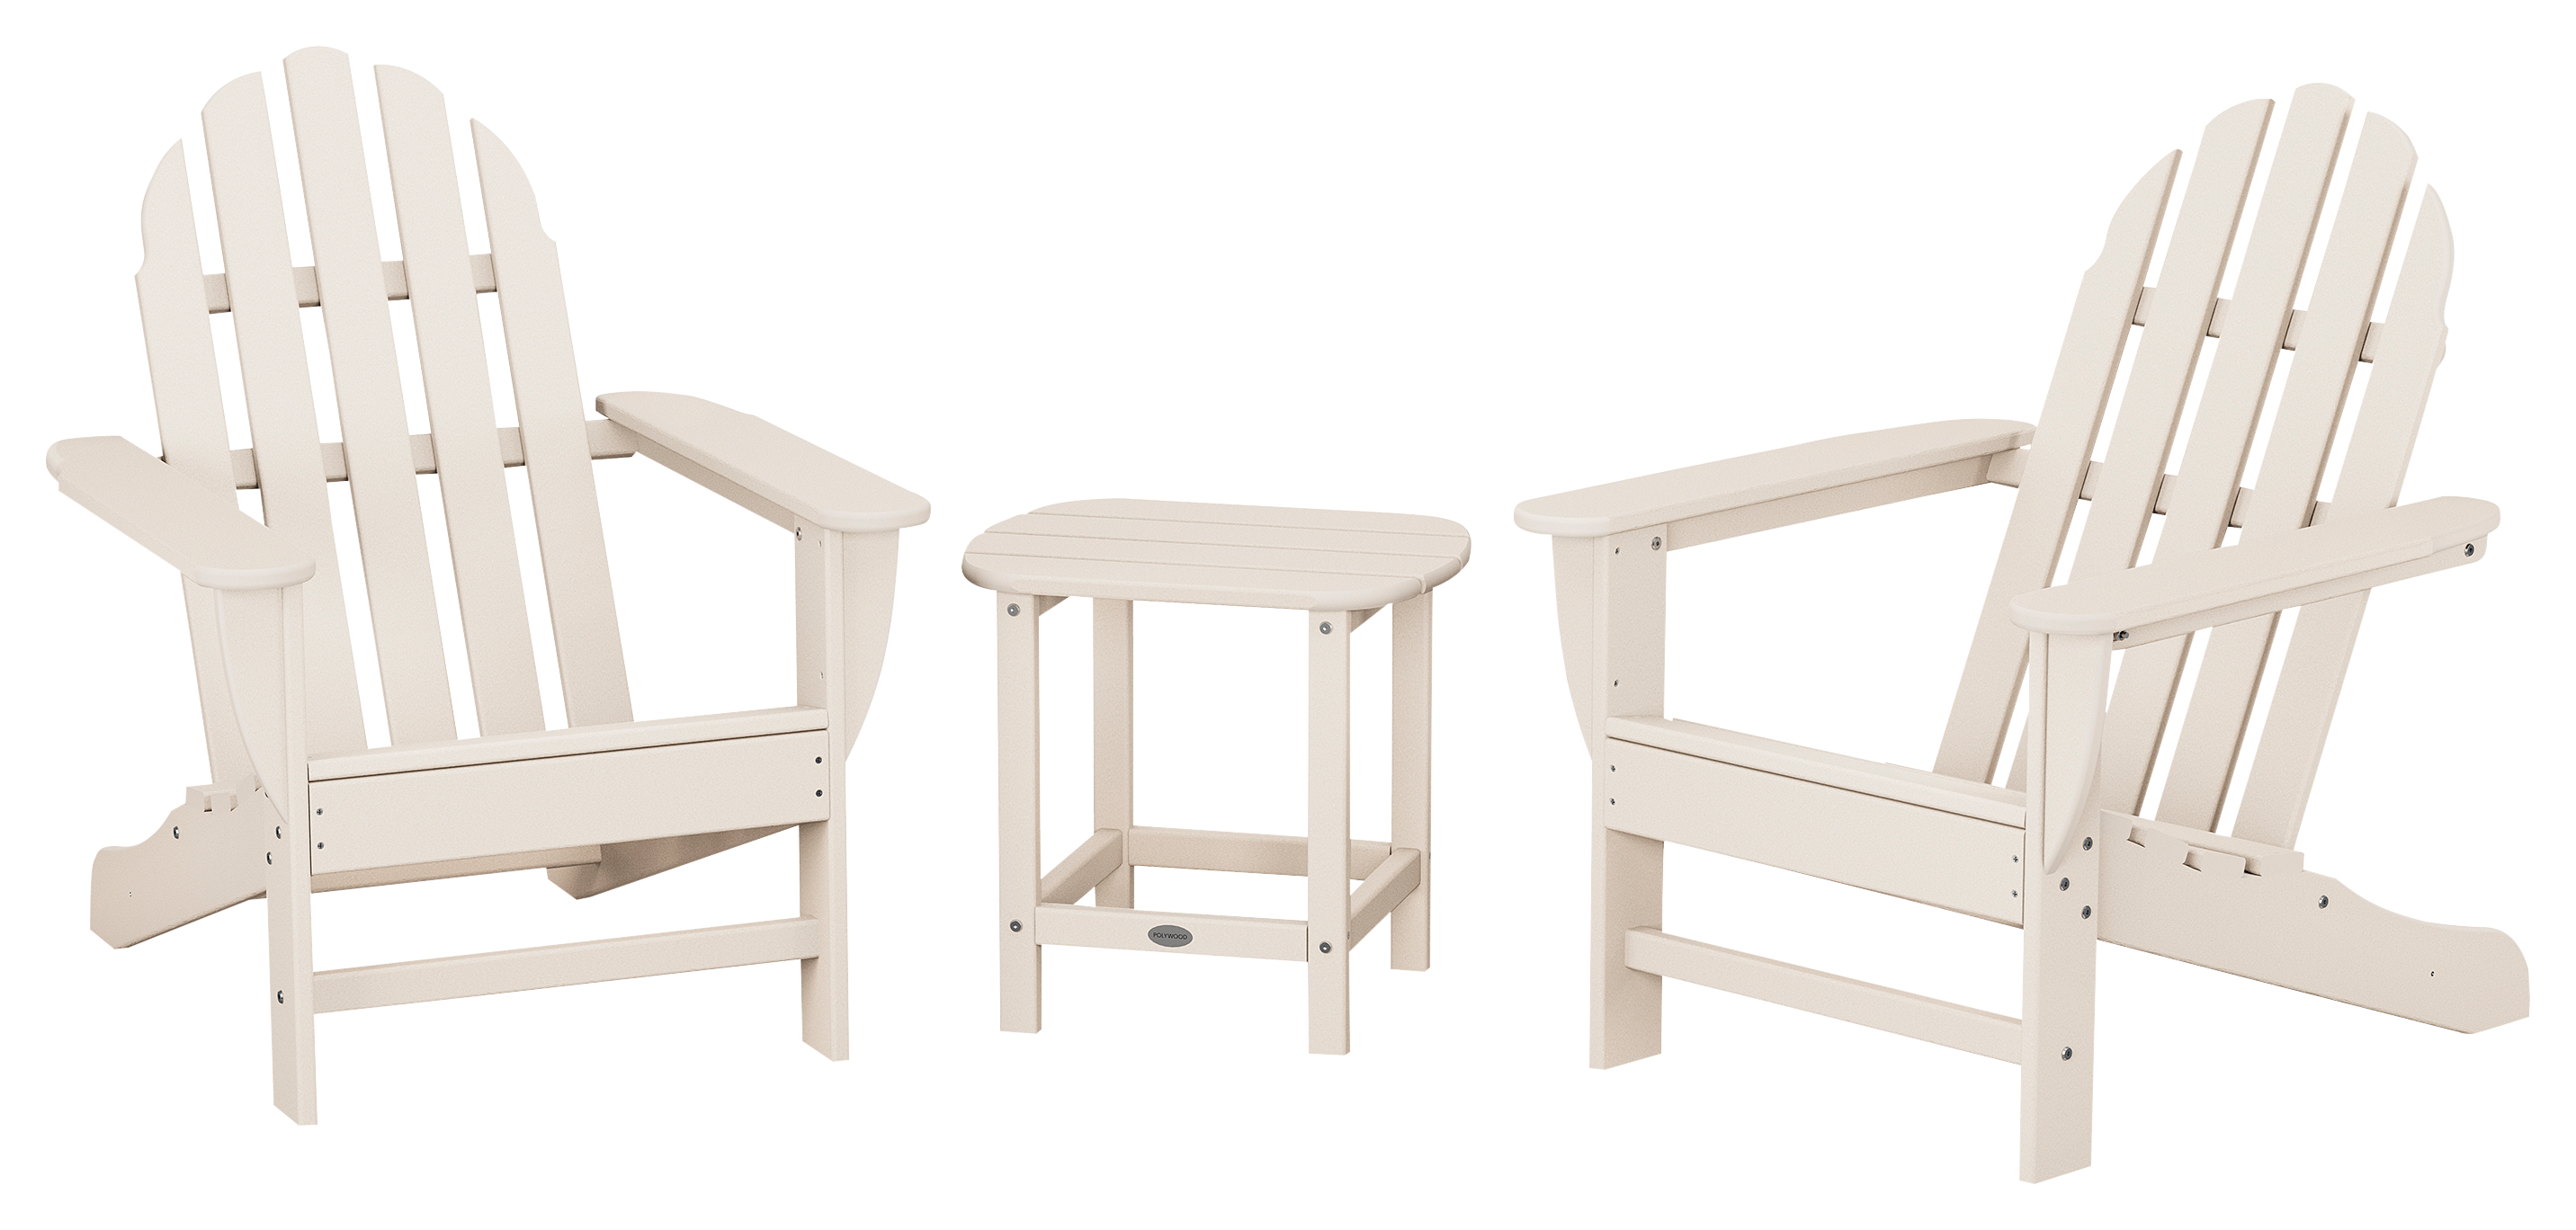 POLYWOOD Classic Adirondack 3-Piece Set with South Beach Side Table - Sand